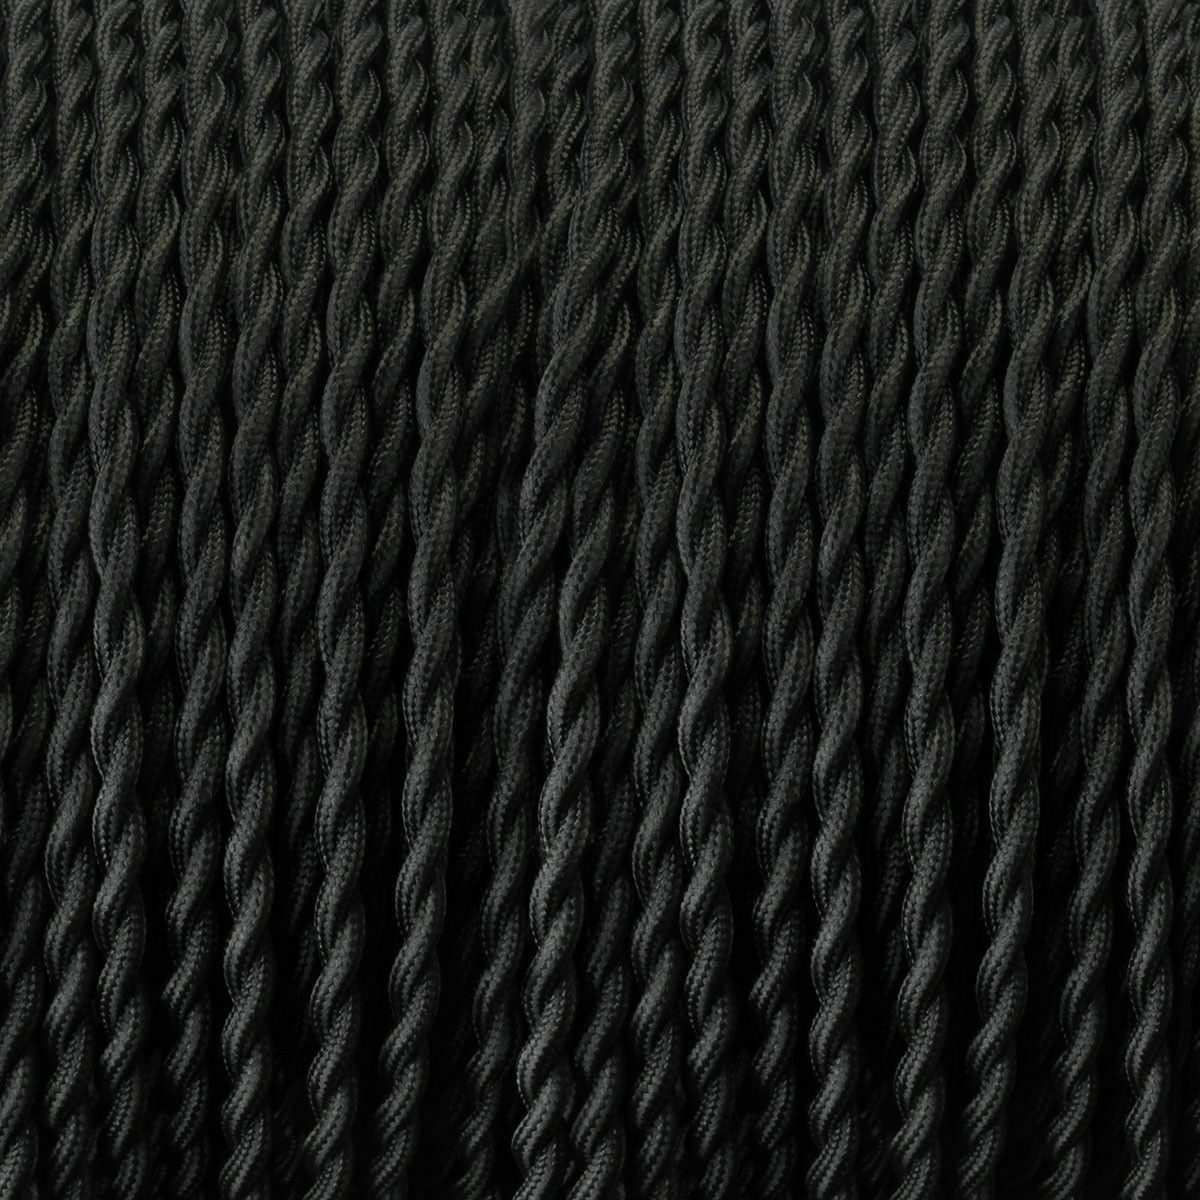 3 Core Braided Twisted Black Fabric Cord